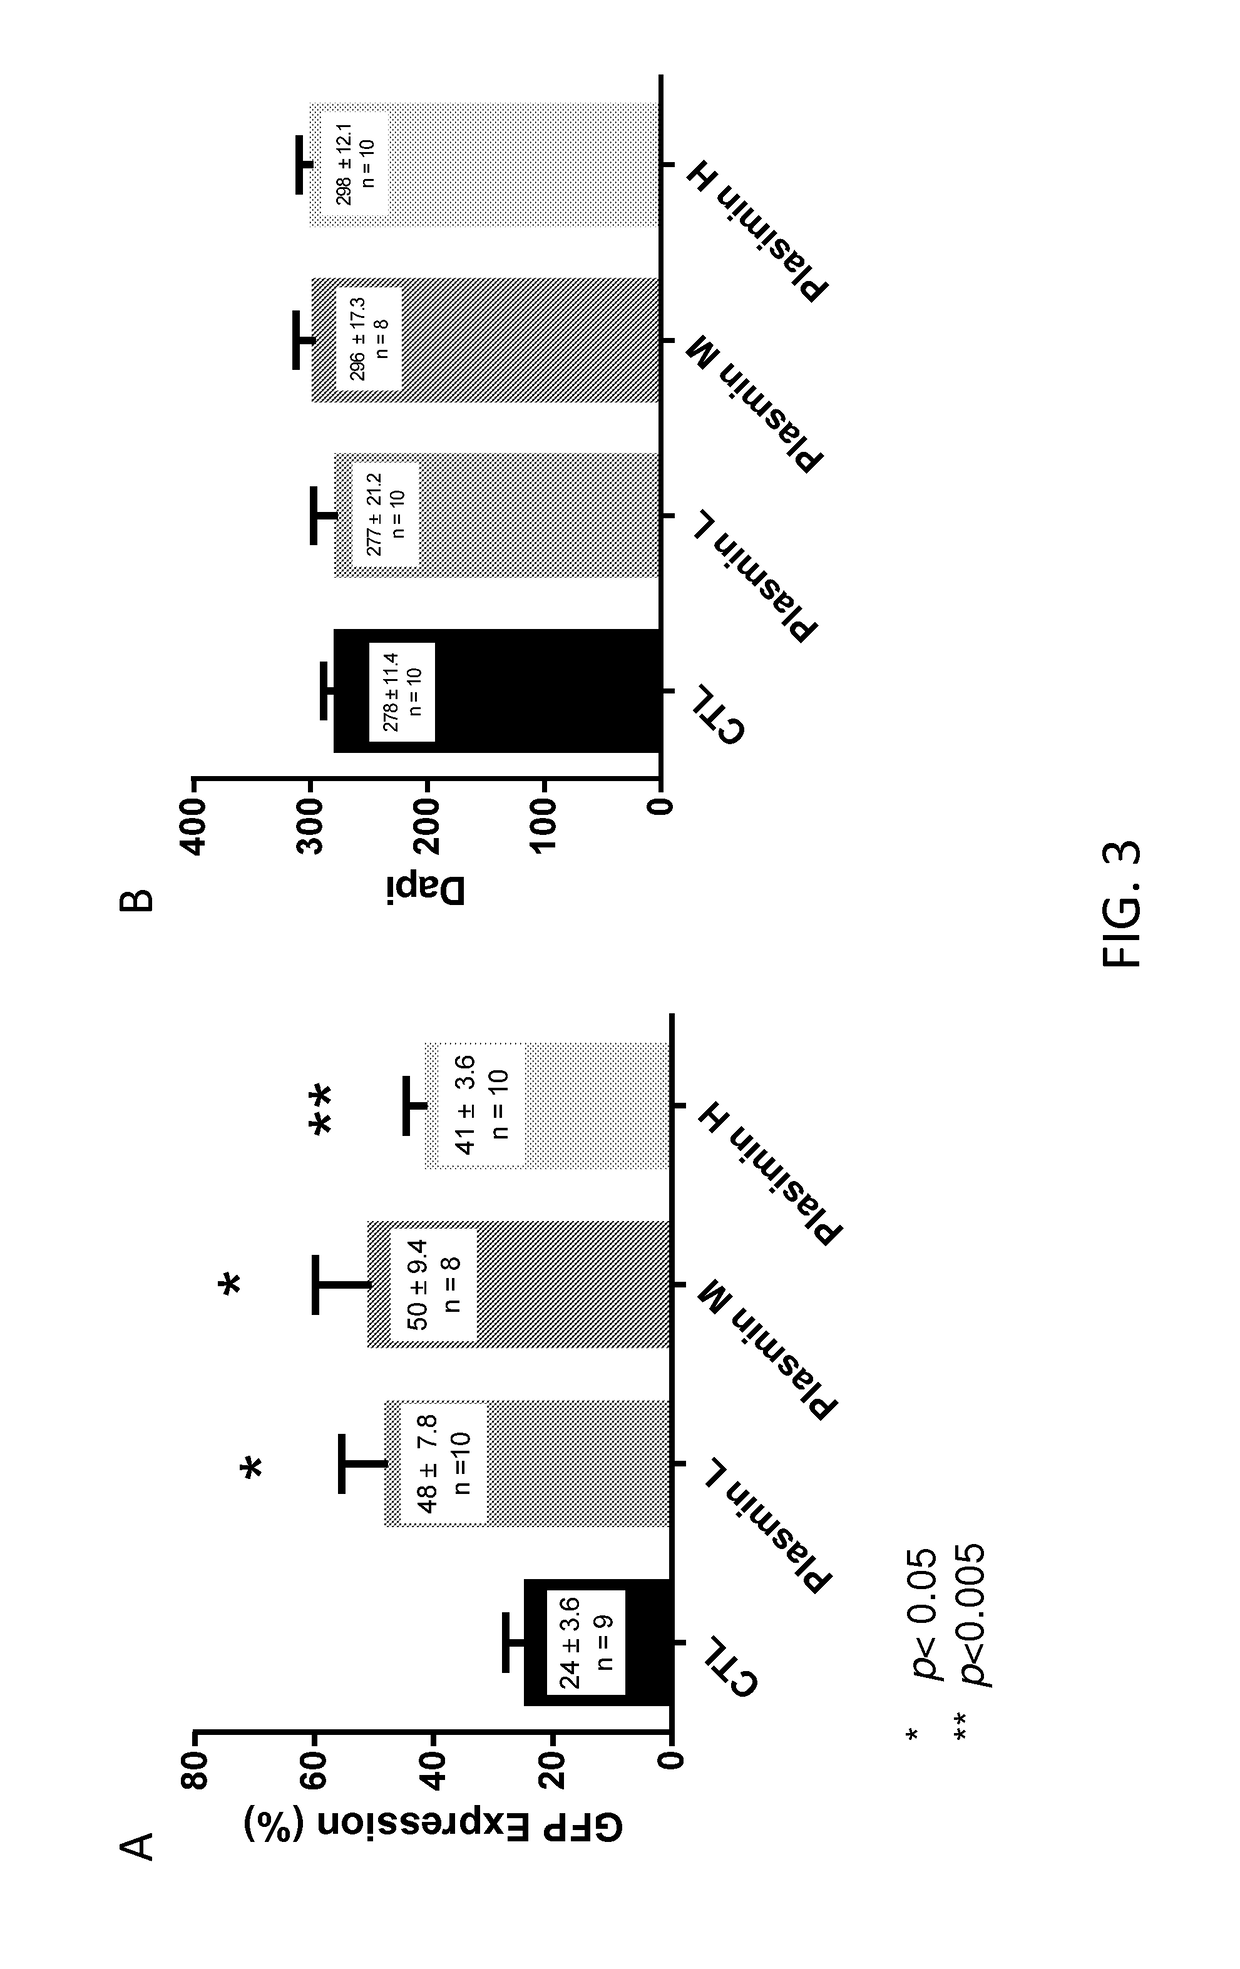 Method of enhancing delivery of therapeutic compounds to the eye